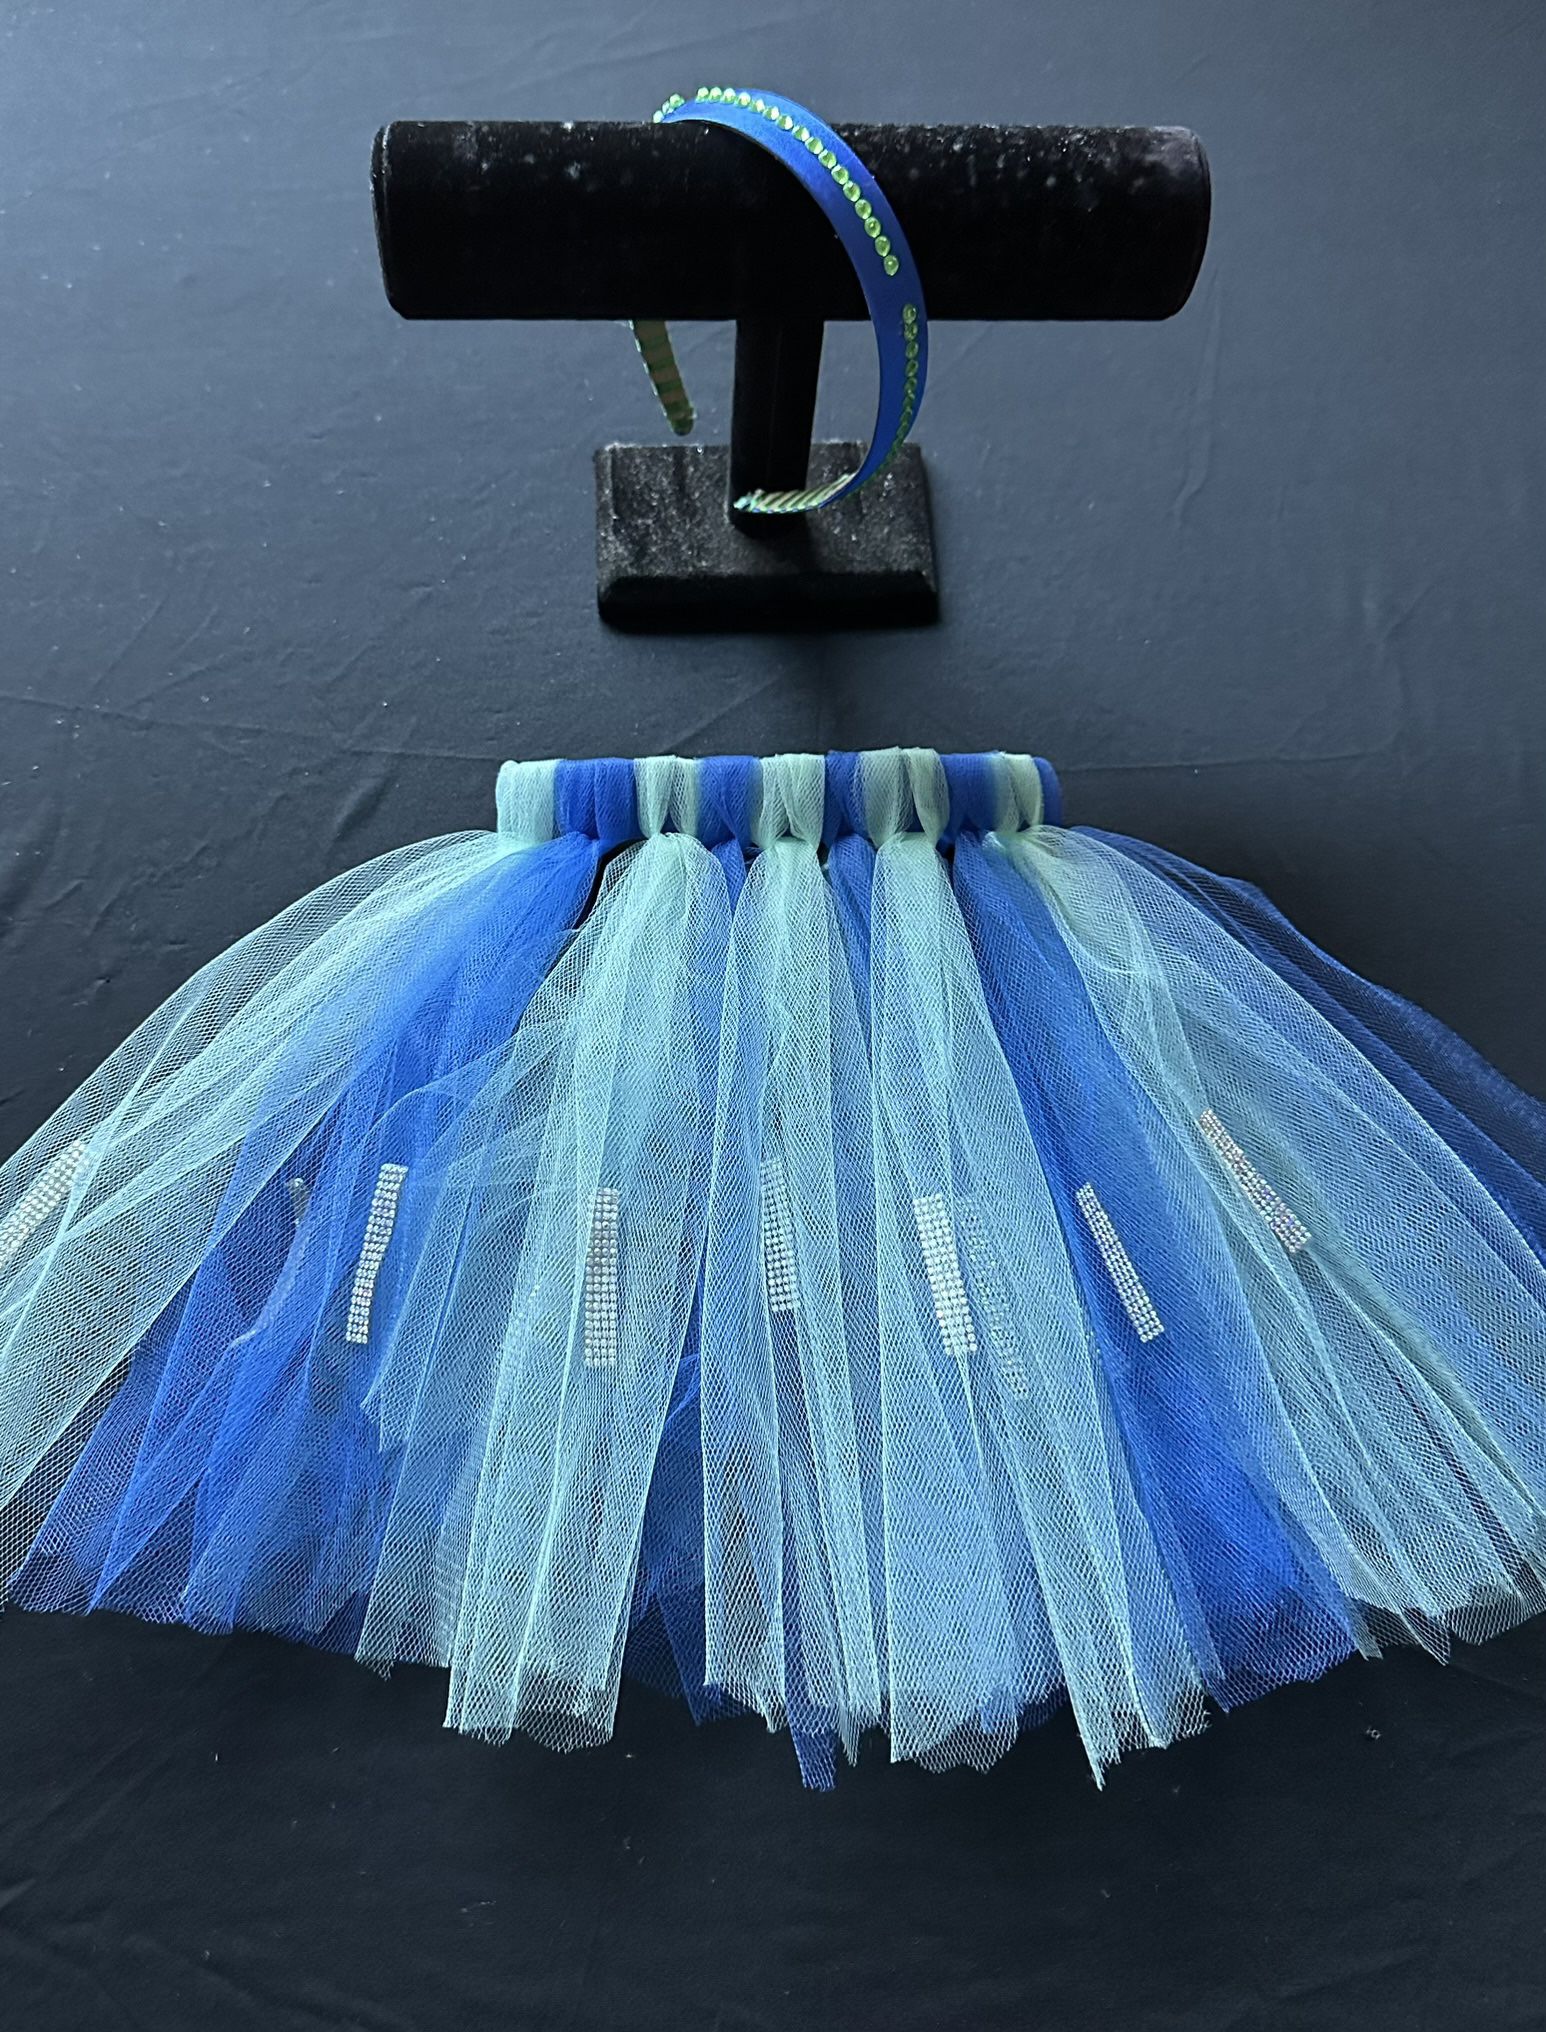 Tulle Skirts And Headbands Up For Sale!!!!!